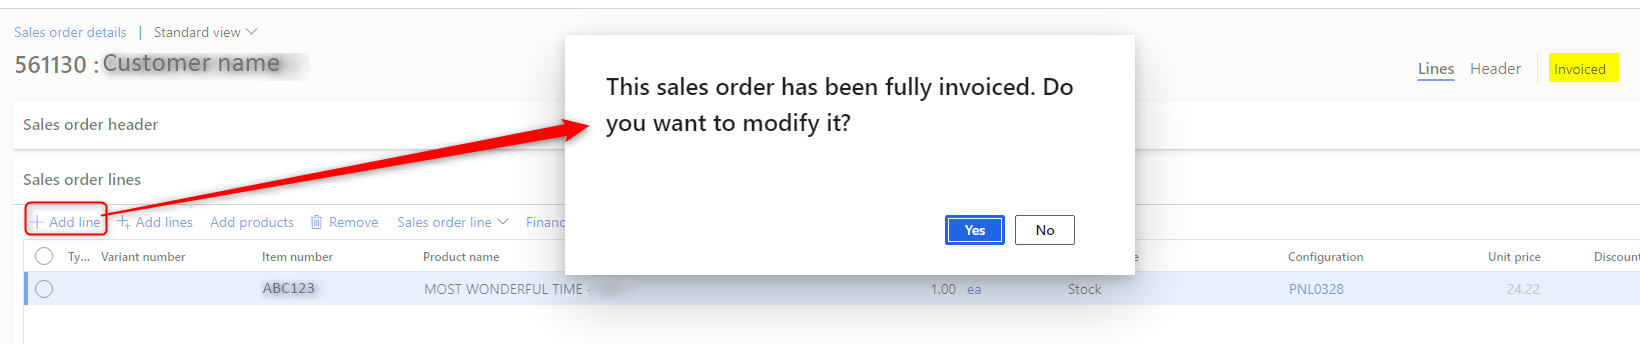 fully invoiced sales order warning